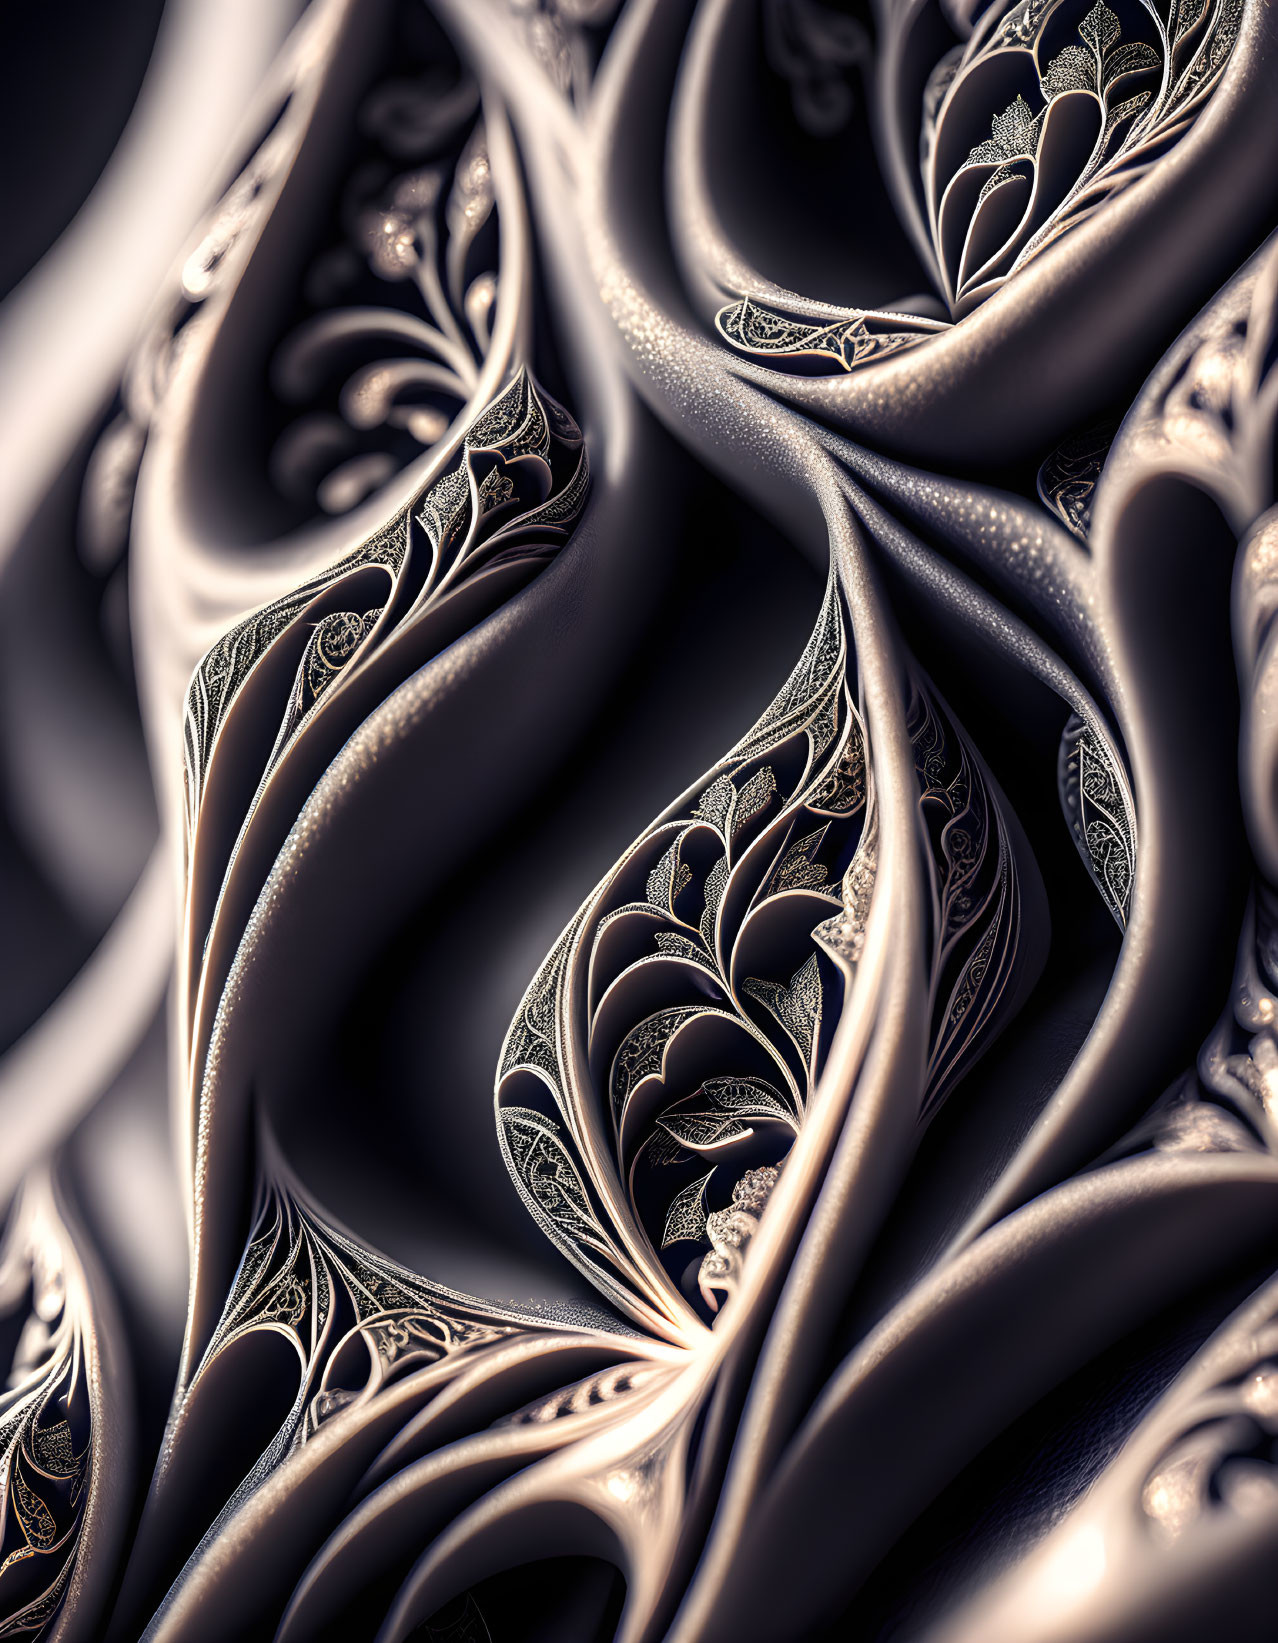 Detailed Monochromatic Fractal Design with 3D Patterns